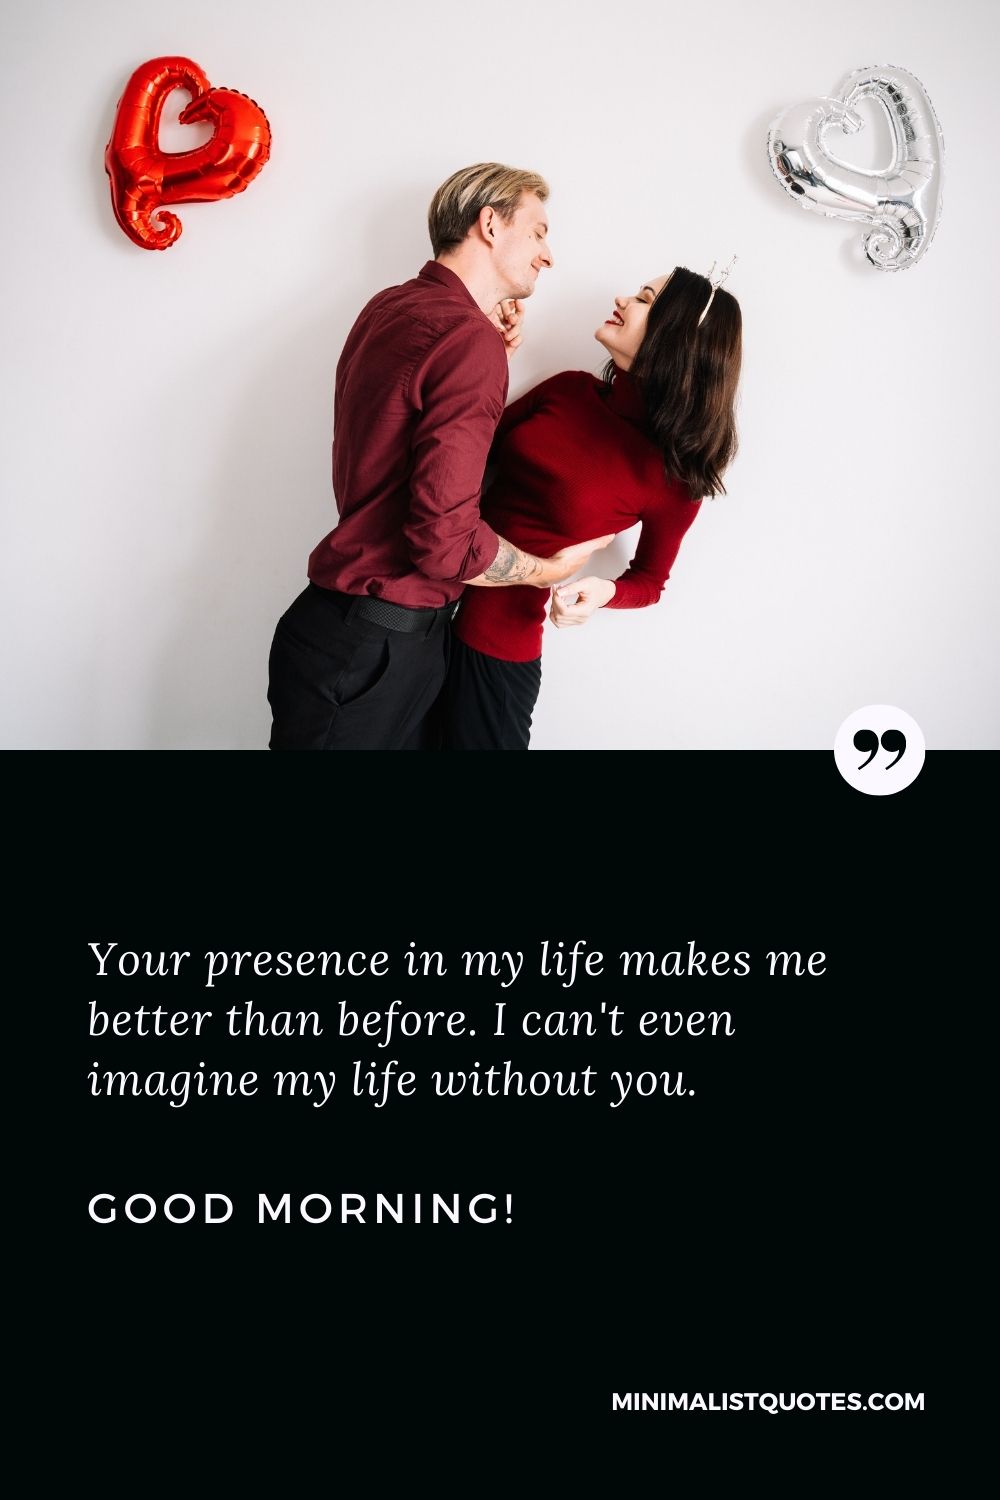 Lovely good morning message for her: Your presence in my life makes me better than before. I can't even imagine my life without you. Good Morning!